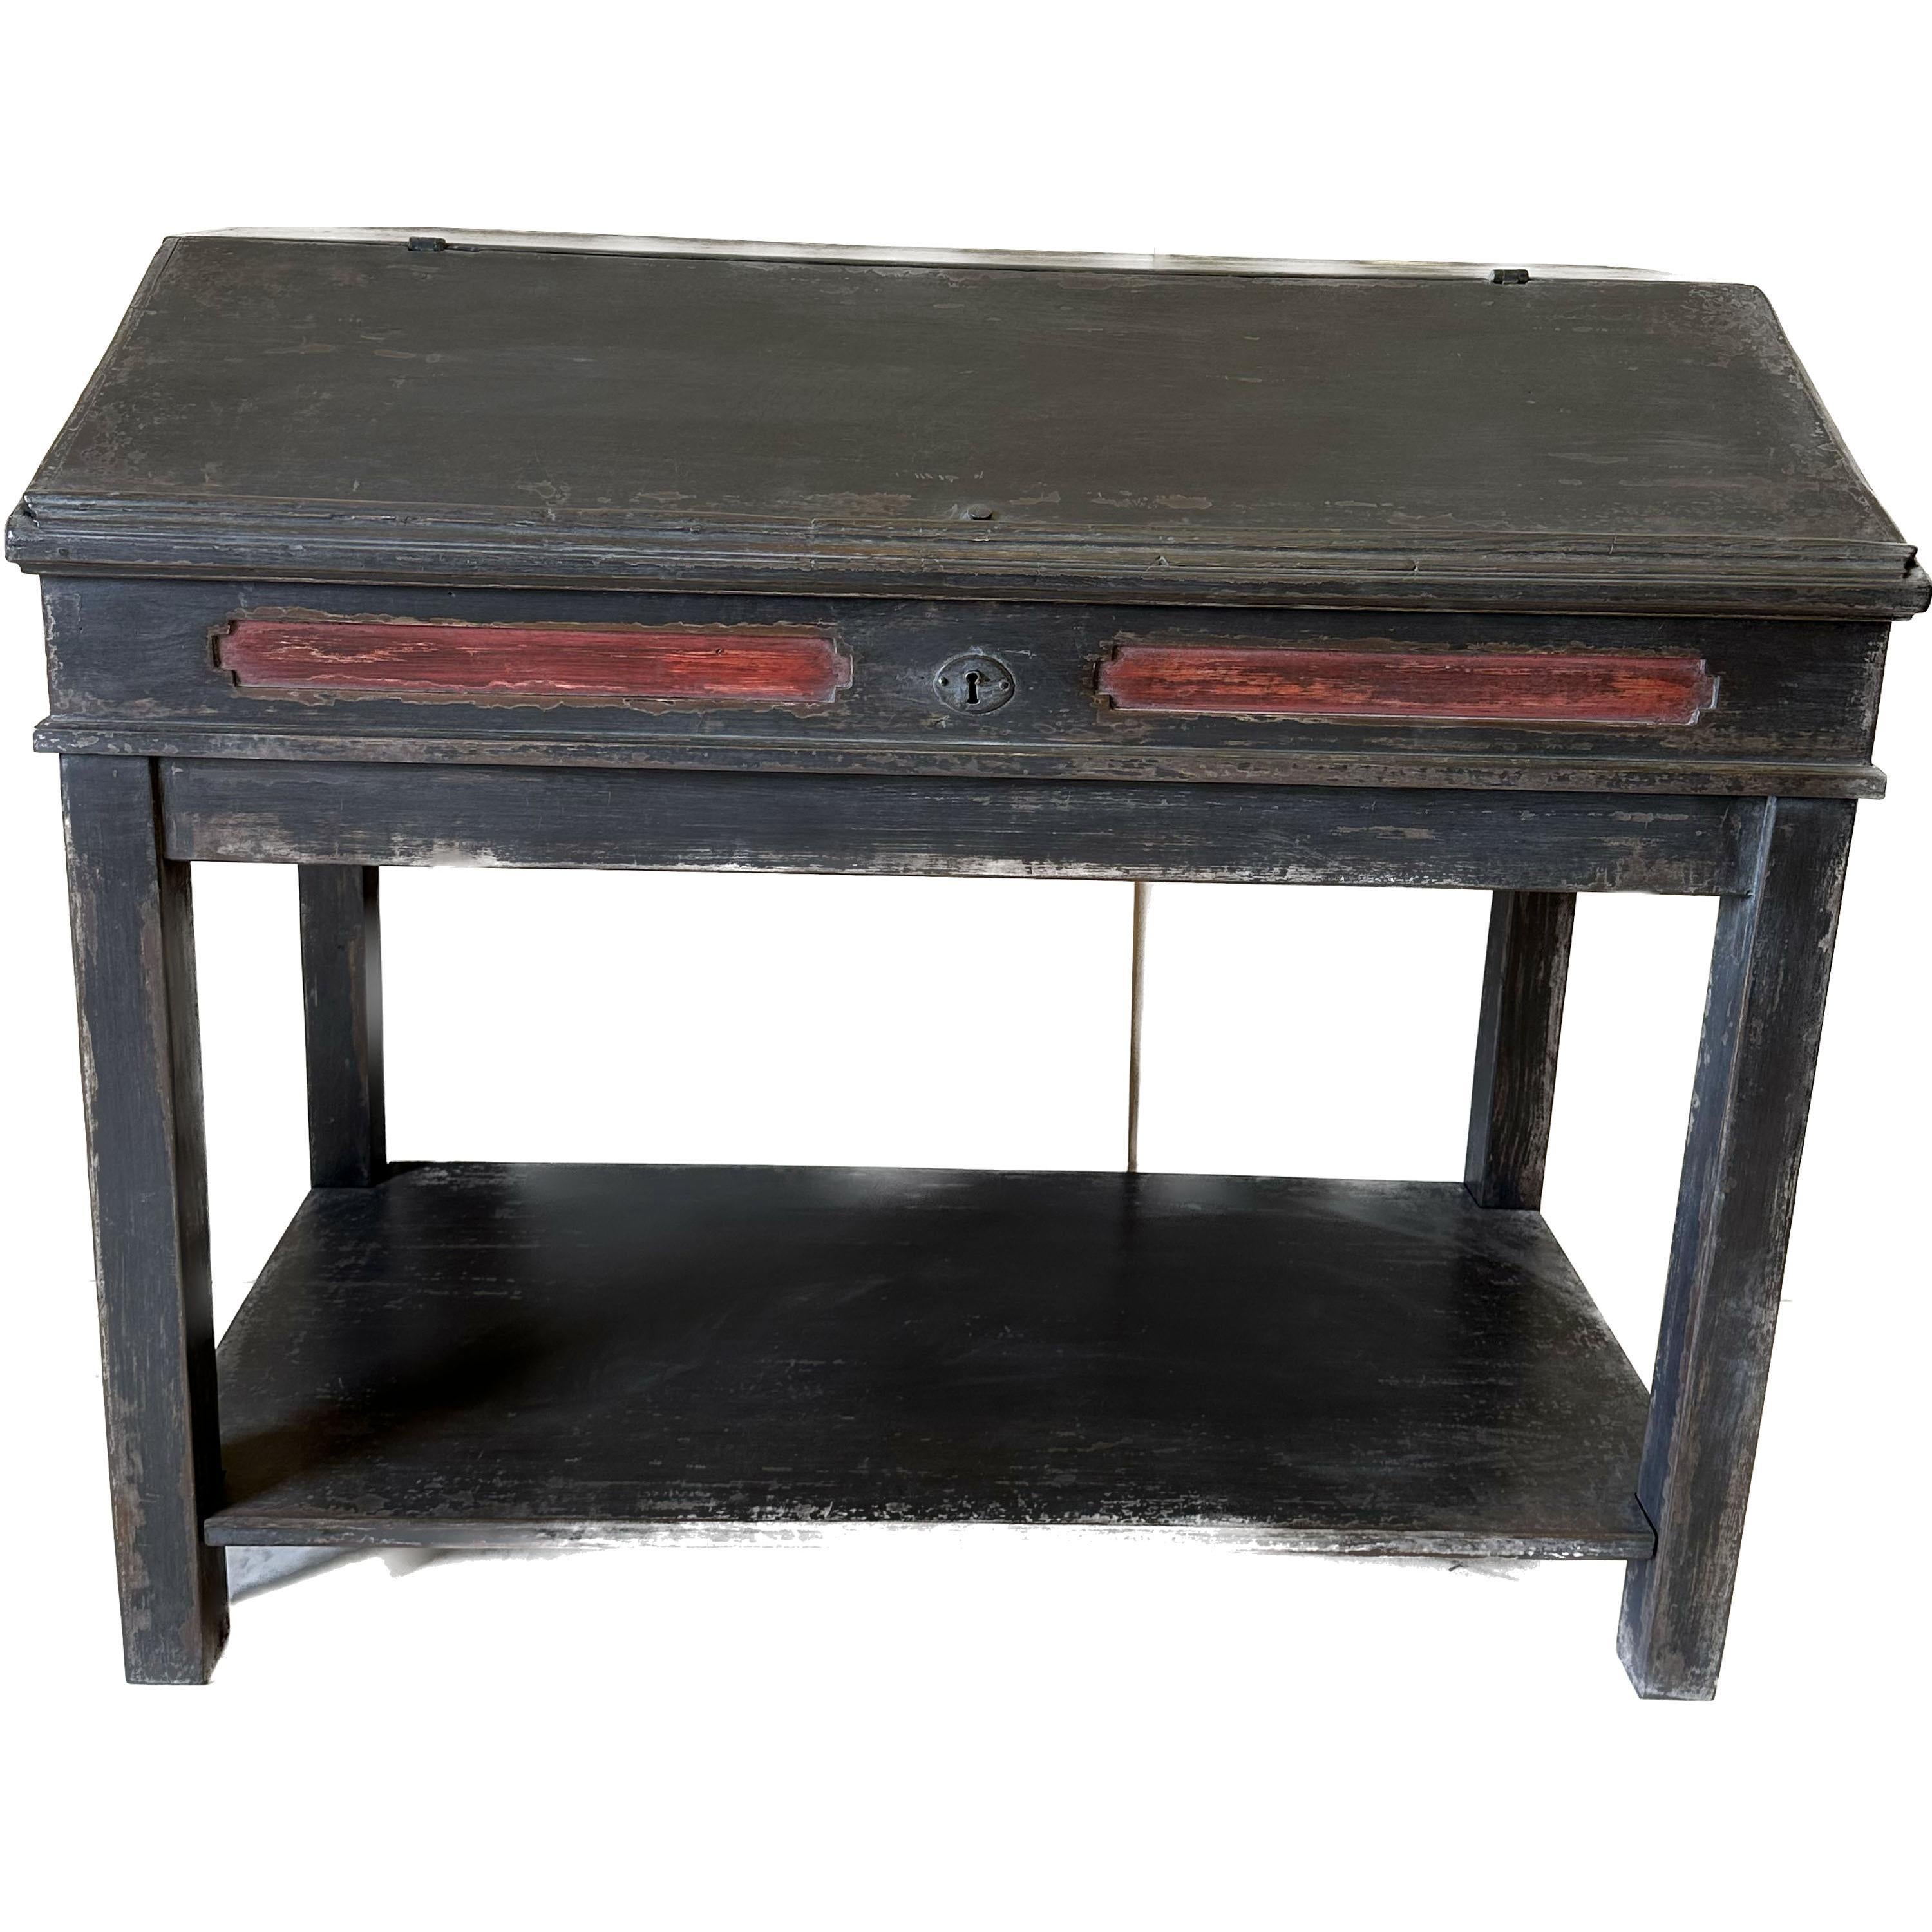 Hand-Painted Lectern-style Desk with hinged Lid, Grey and Red, 19th Century For Sale